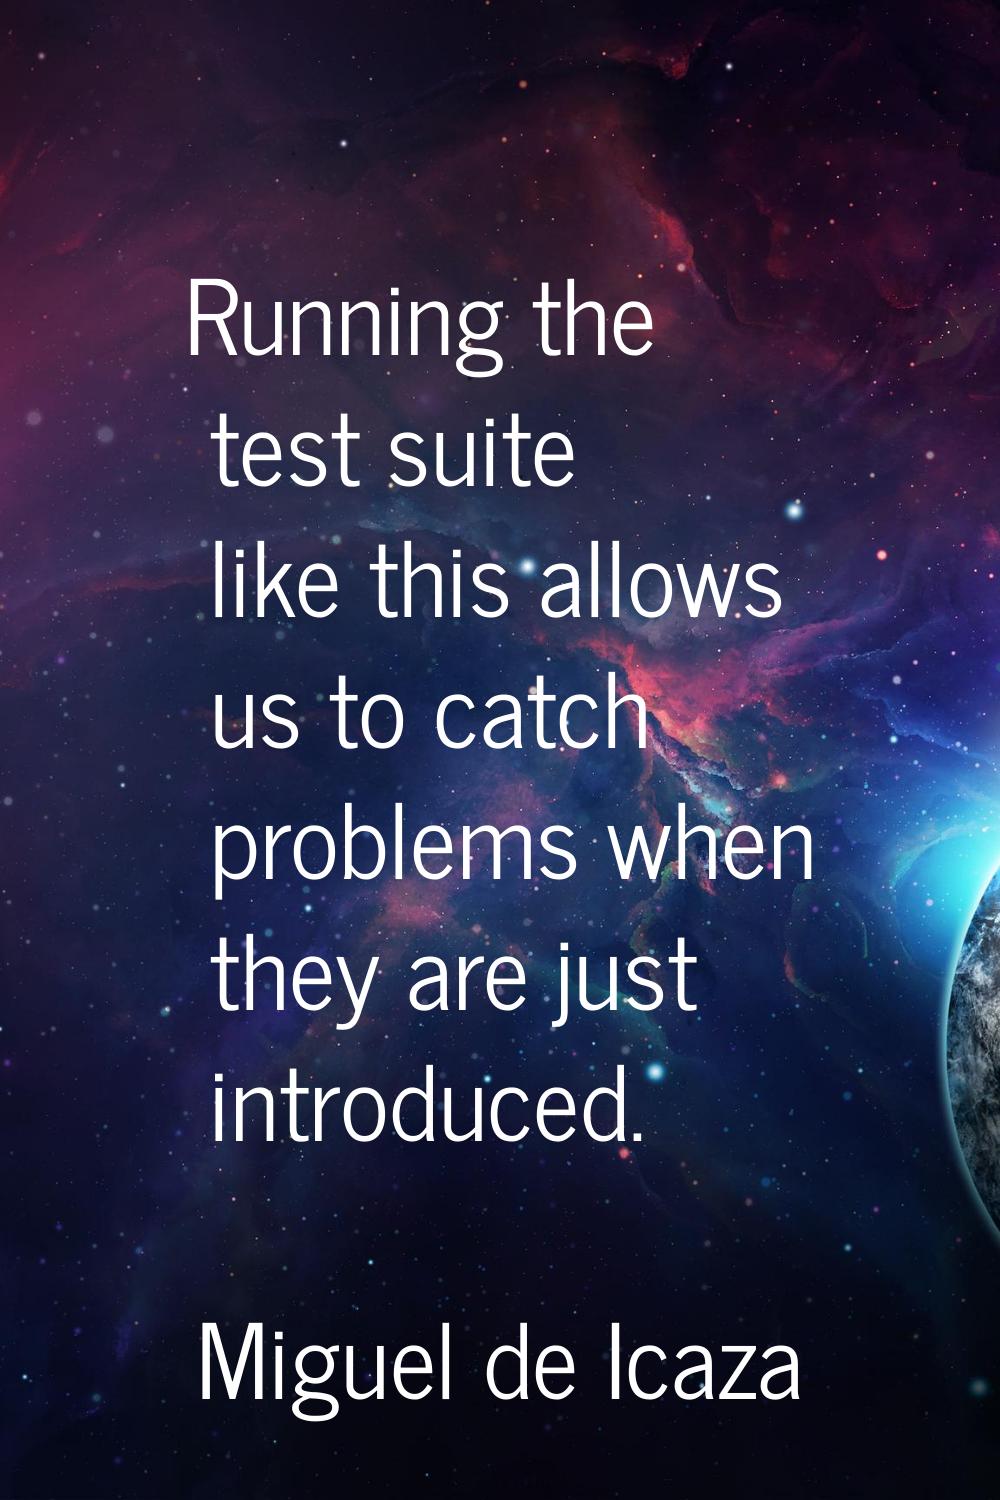 Running the test suite like this allows us to catch problems when they are just introduced.